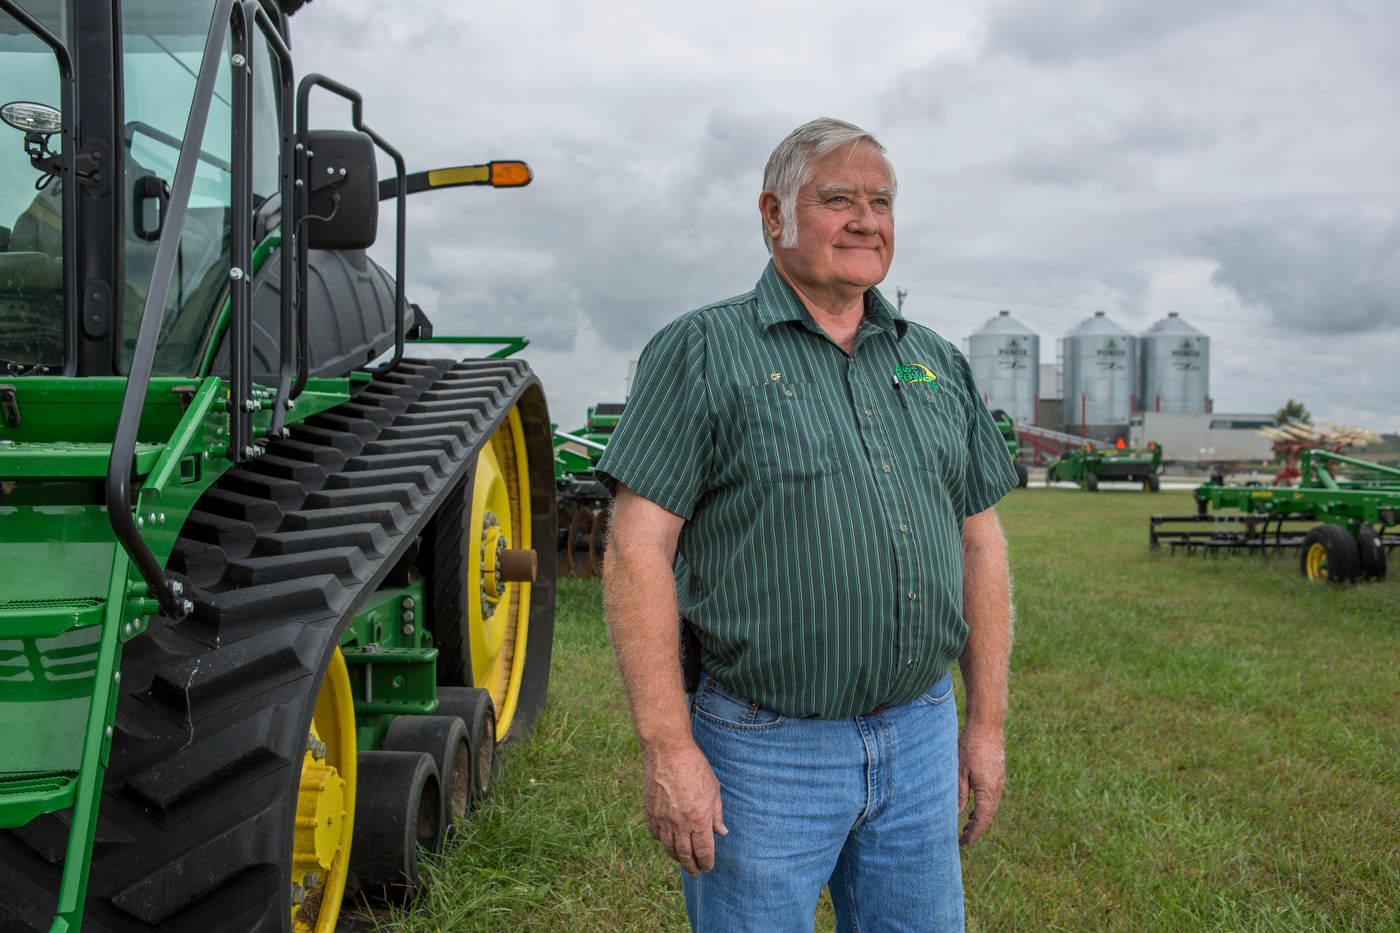 {quote}No one thought that Trump was gping to win the nomination. I support him because of the supreme court nomination{quote}, John Deere salesman, Missouri.